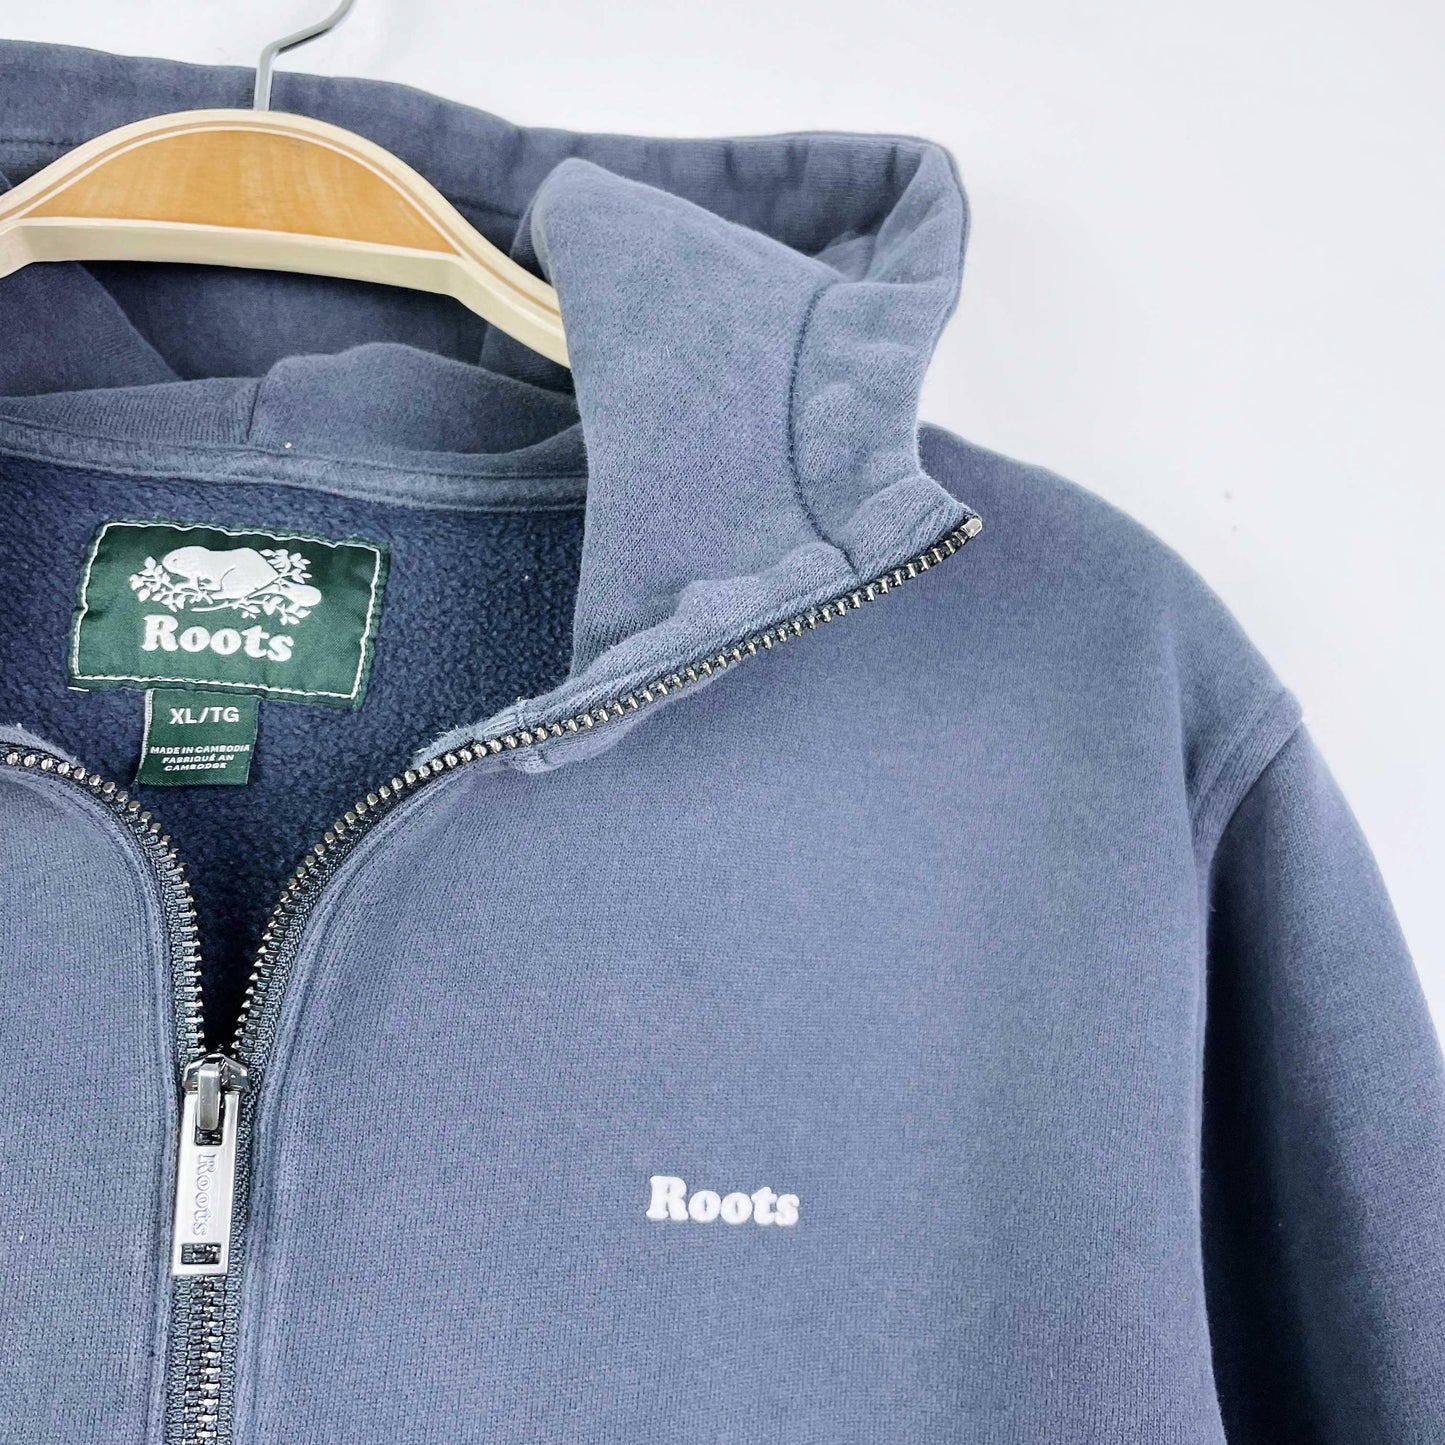 roots cloud 1/2 zip hoodie - size small